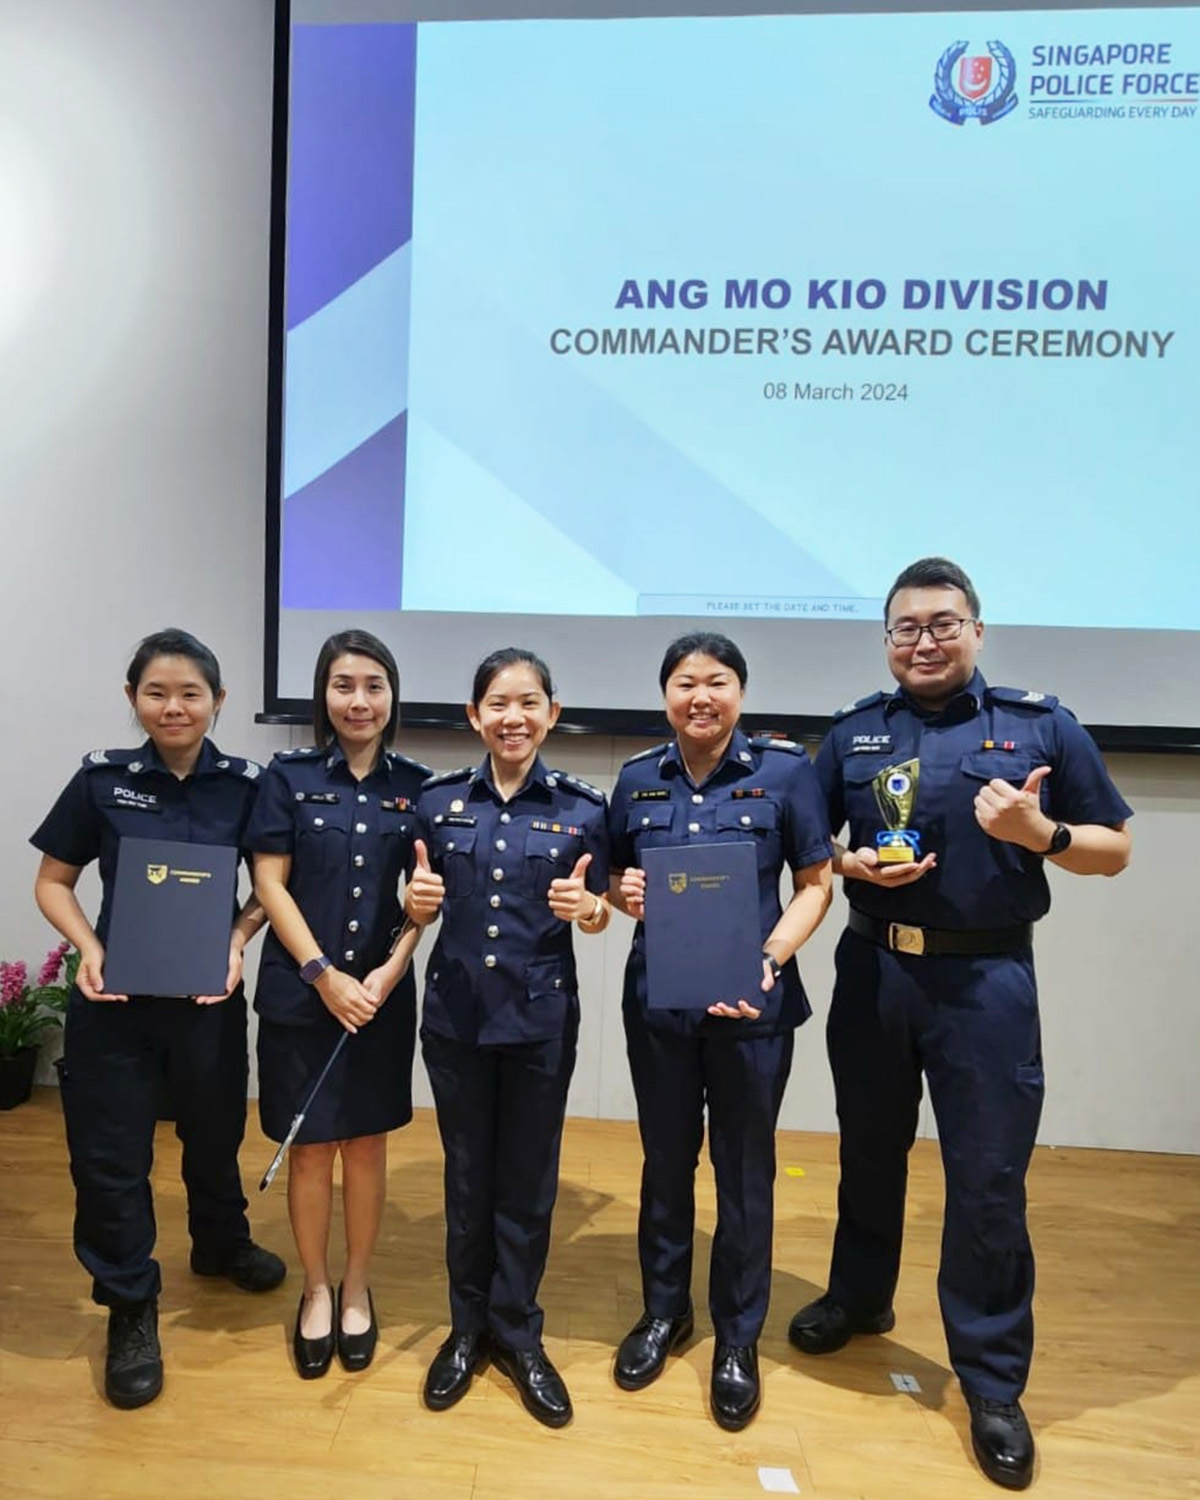 Supt Ong and her team at the 2024 Commander’s Award Ceremony. PHOTO: Supt Ong Ruo Cheng